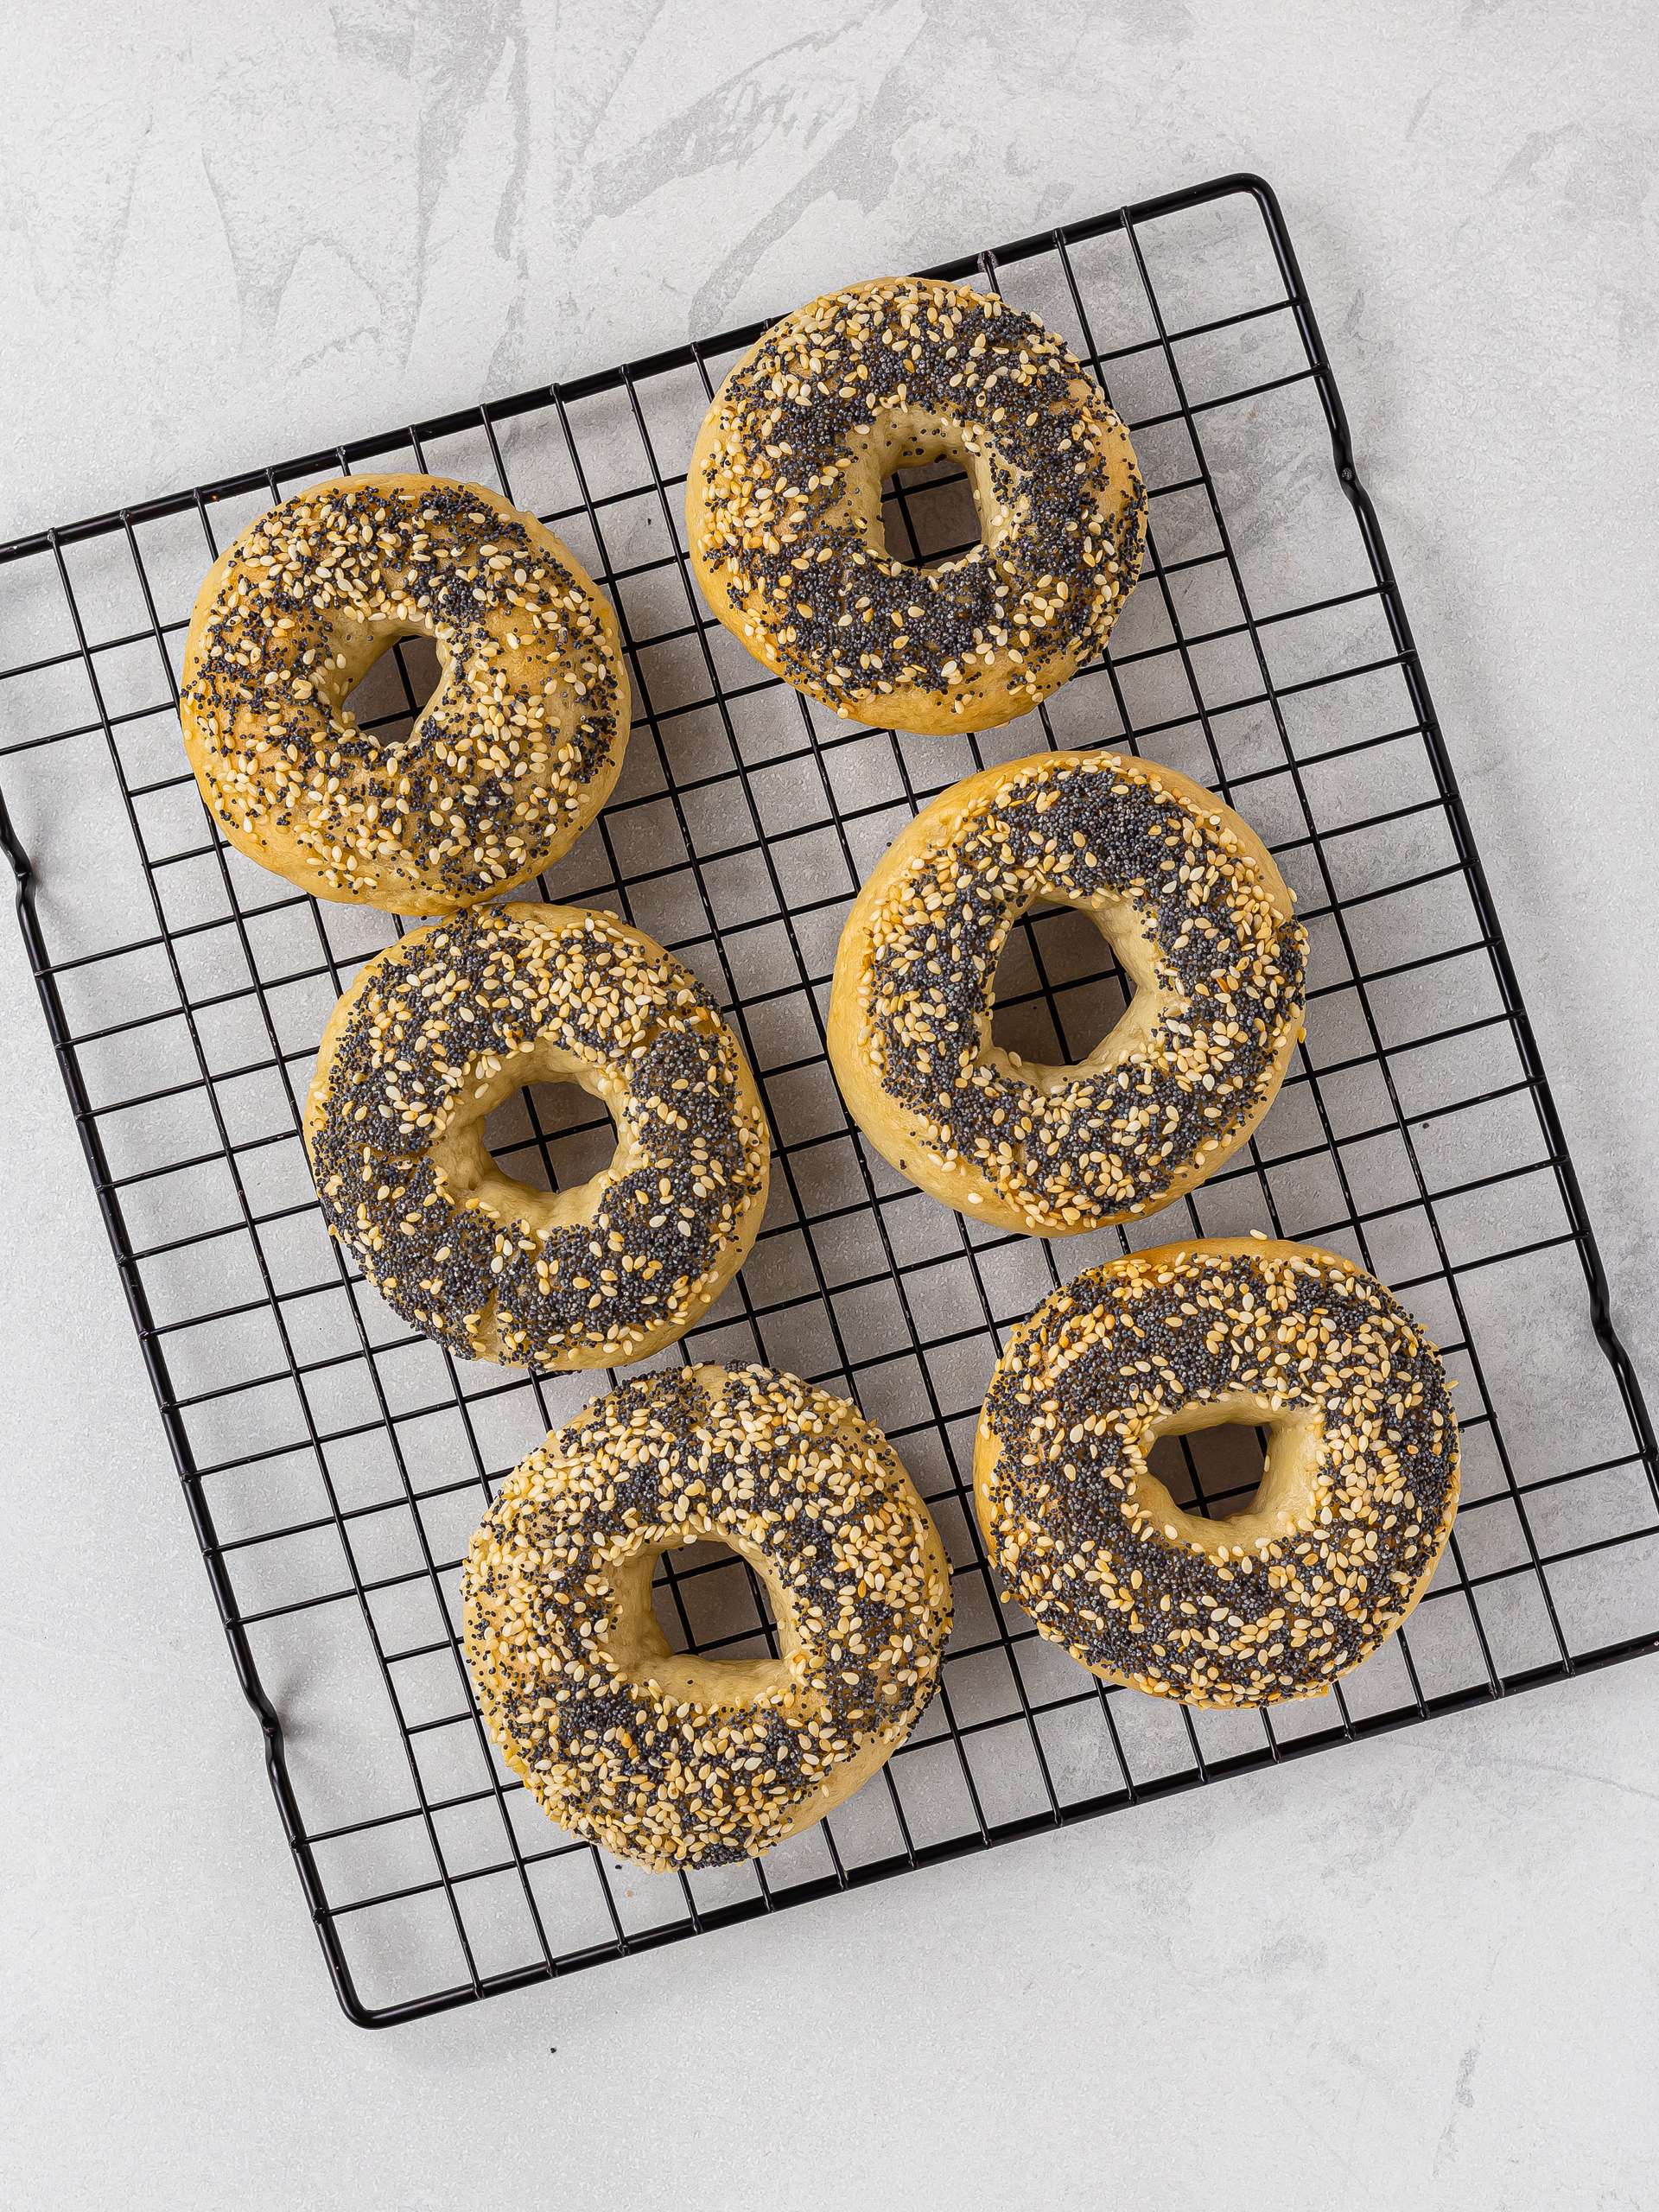 baked gluten free bagels on a rack